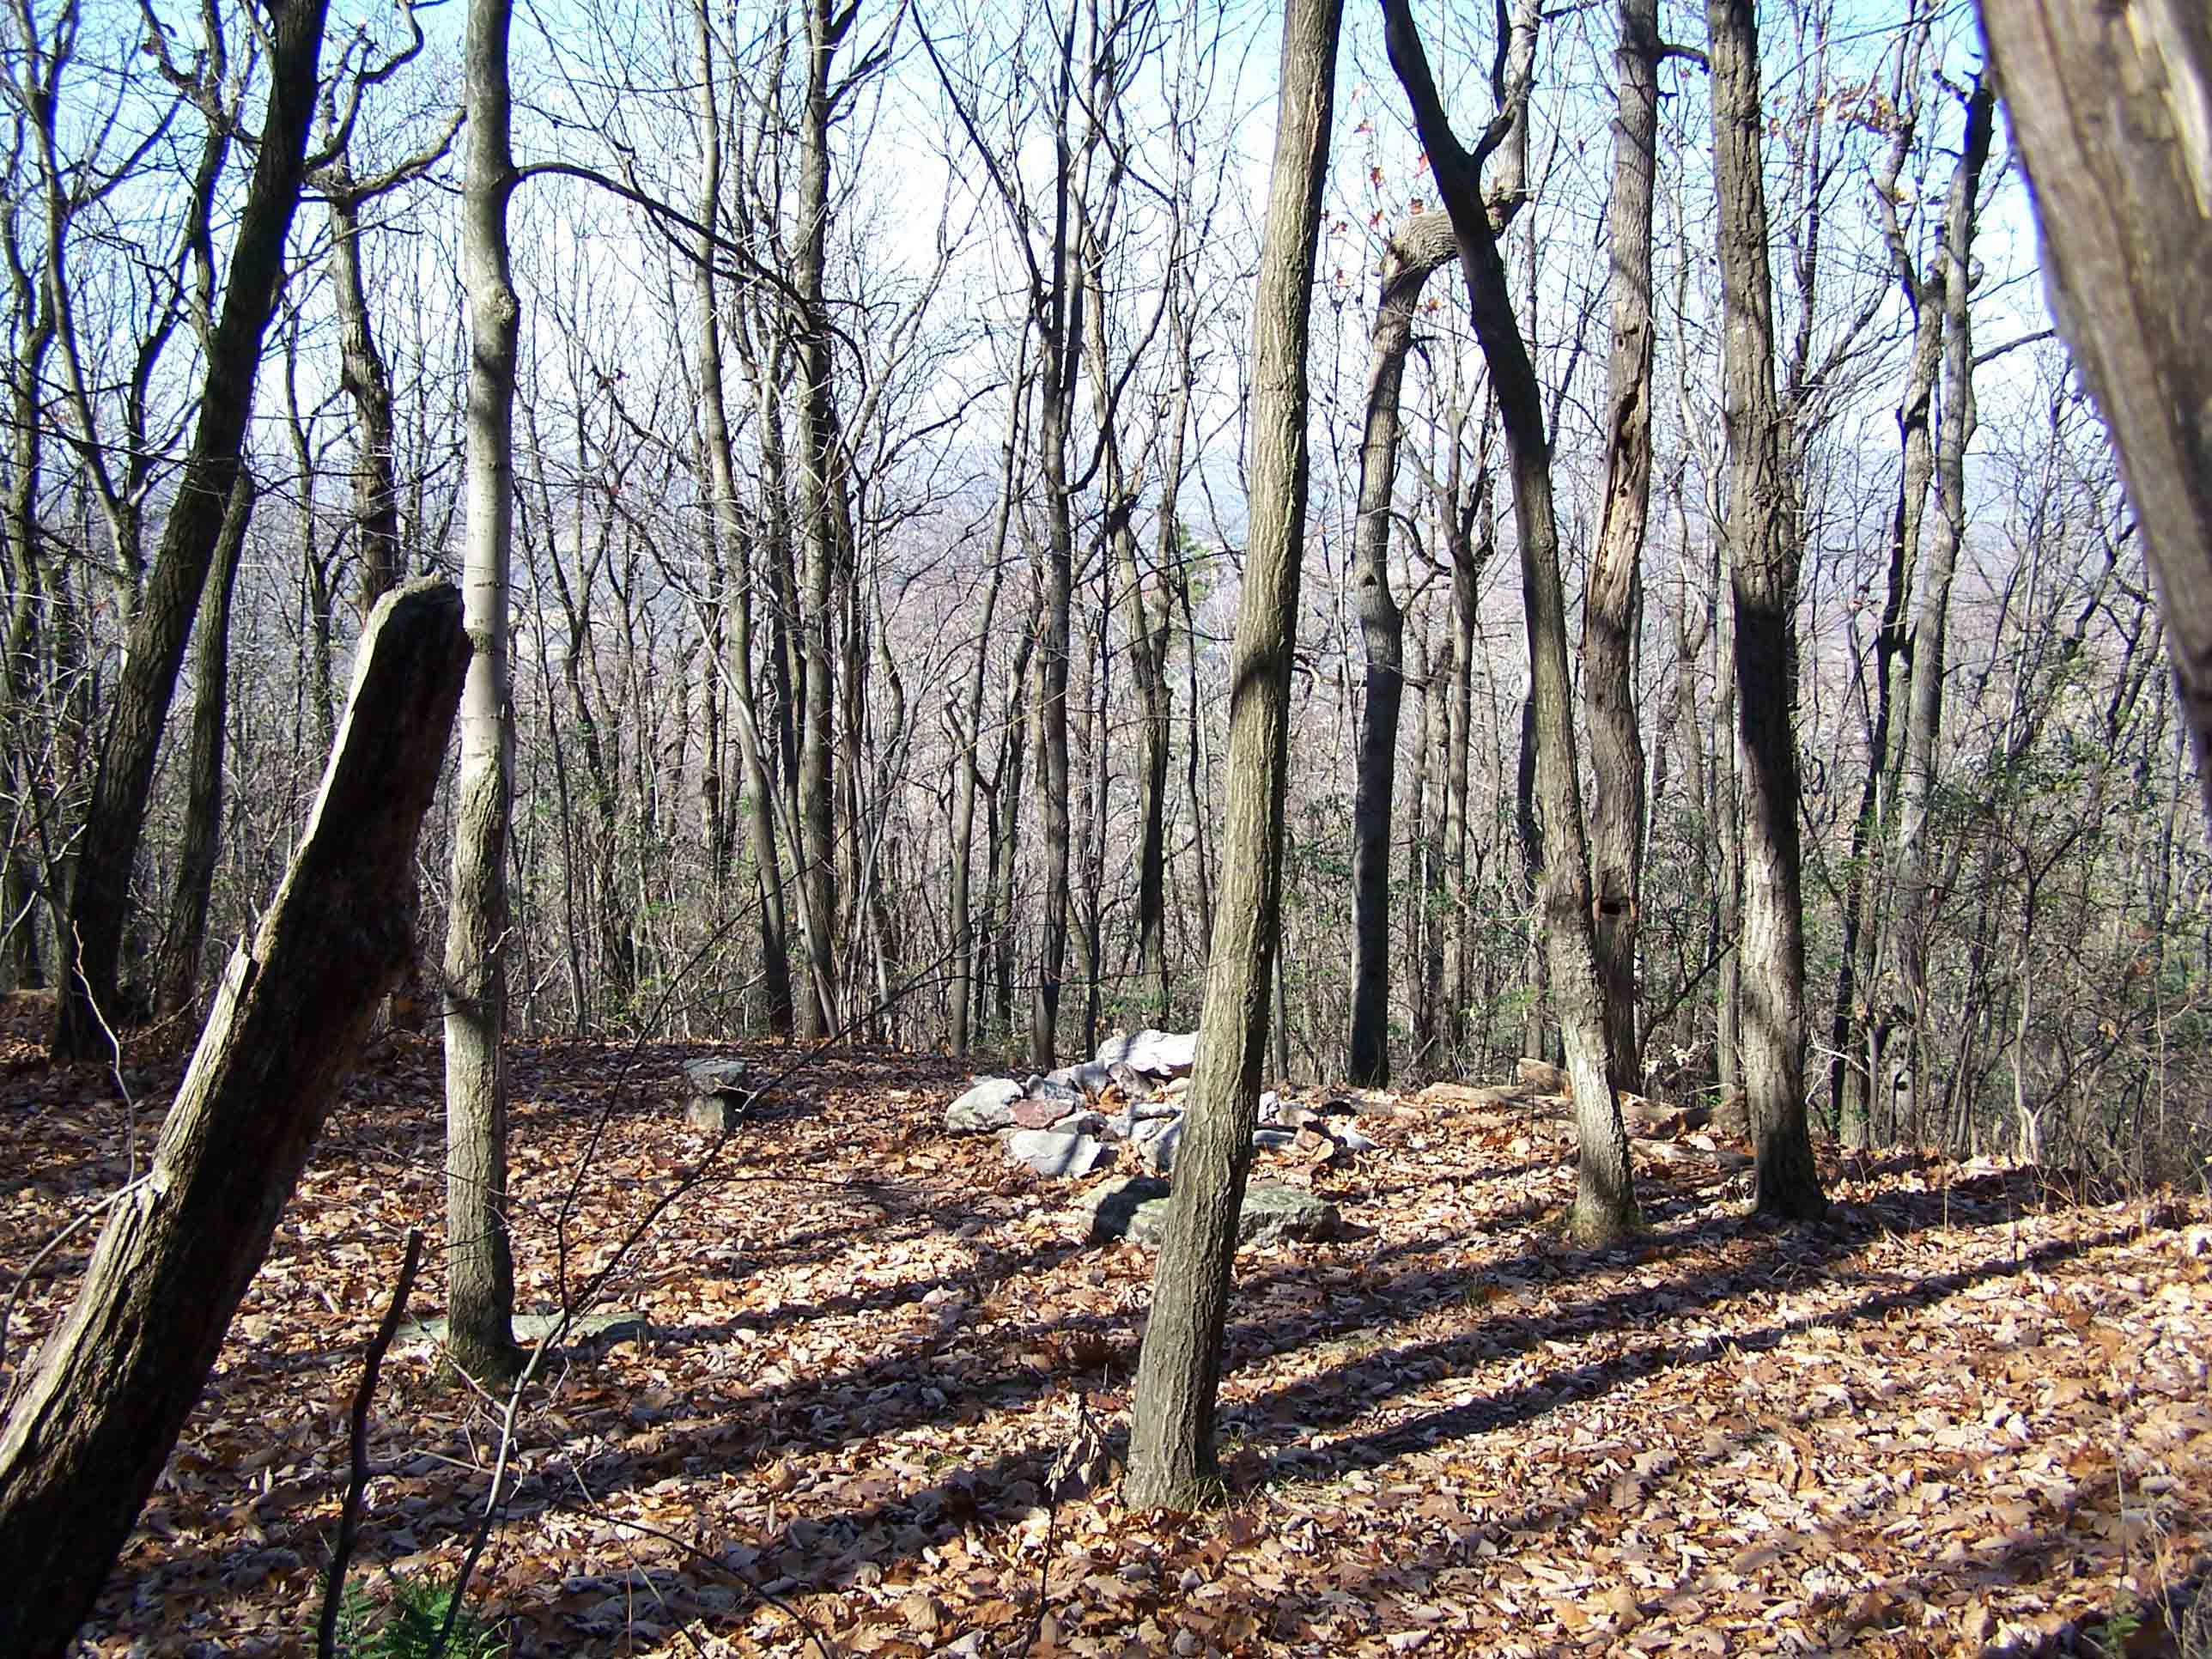 Campsite on trail between Lehigh Furnace Gap and Bake Oven Knob. Courtesy at@rohland.org